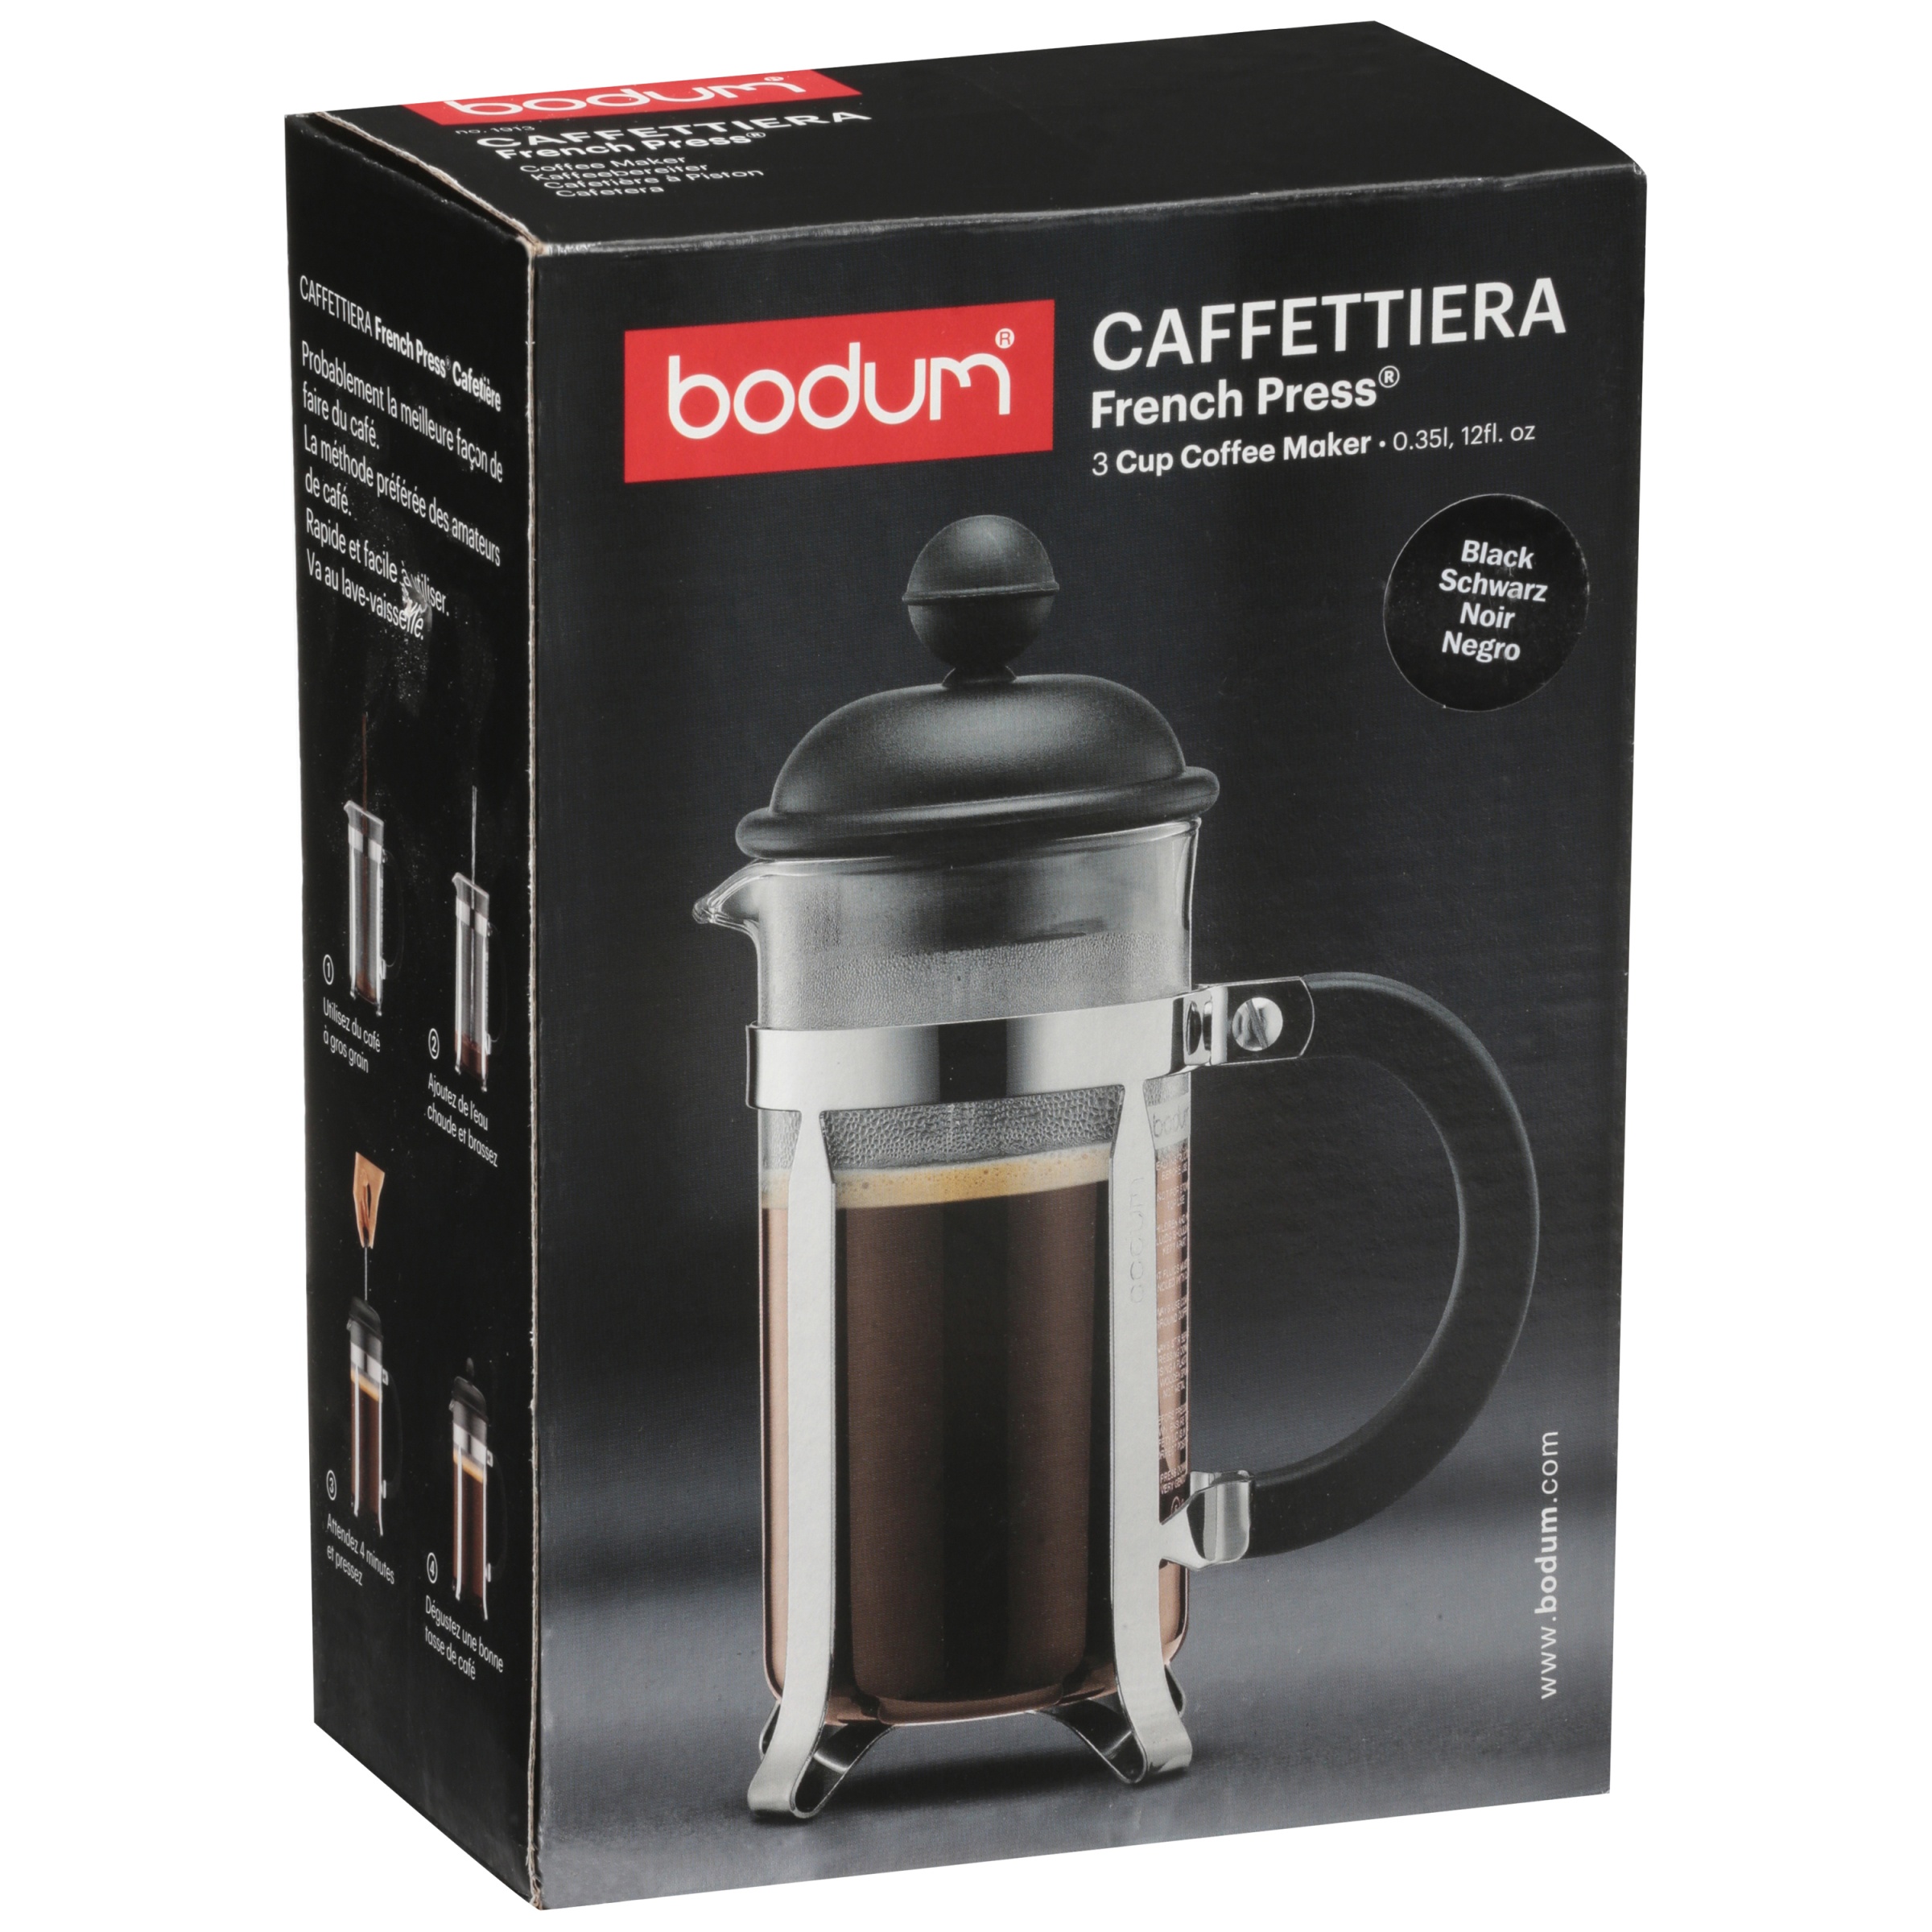 https://wp.sieuthicafe.vn/wp-content/uploads/2018/07/Bodum-CAFFETTIERA-French-Press-Coffee-Maker-12-oz.-0.35-L-3-CupBlack.jpeg